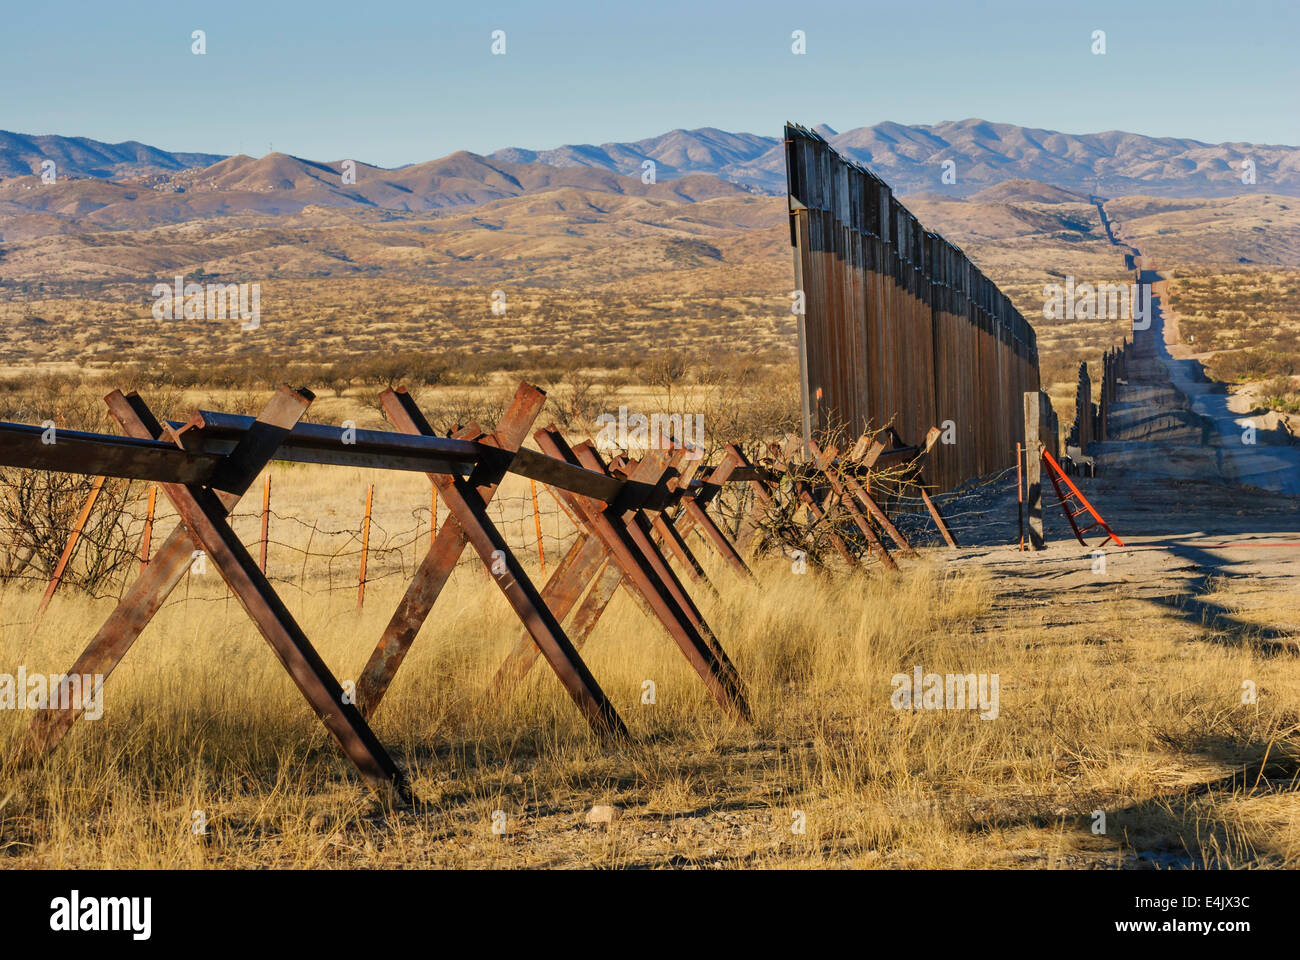 The US-Mexico Border: A Dangerous Place With or Without a Wall